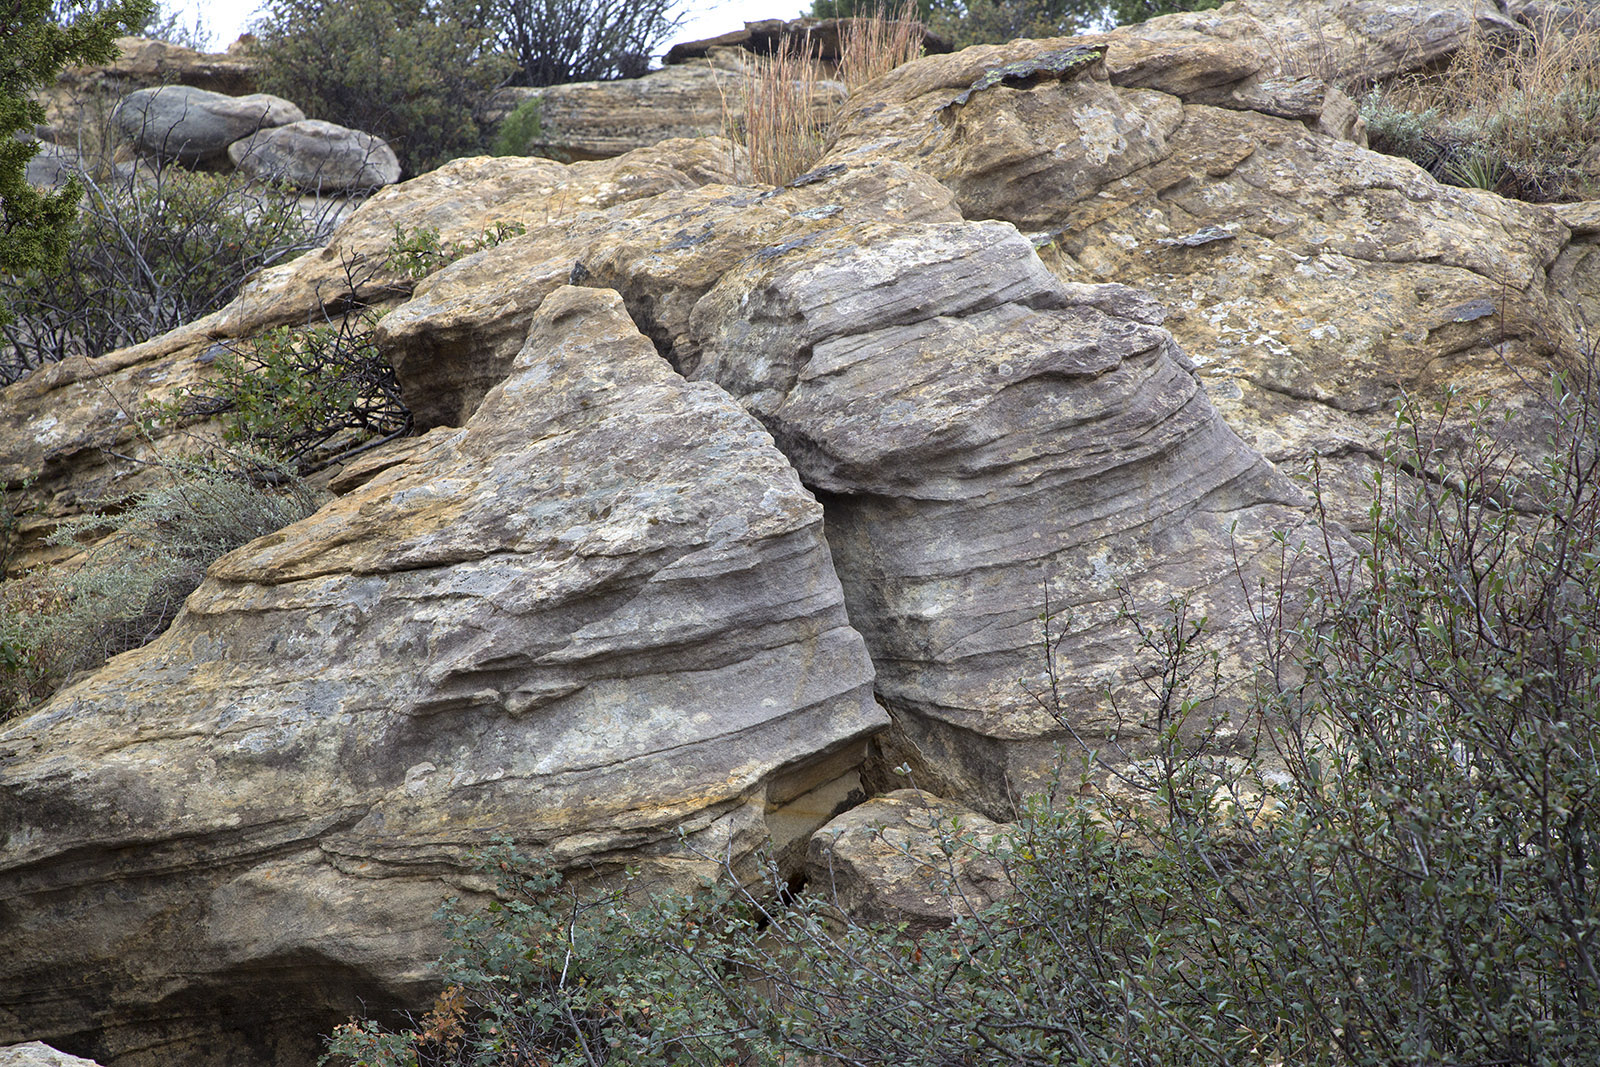 Weathered and eroded sandstone layers from the Cretaceous period on the valley base of Black Mesa near Kenton, OK where the Okie-Tex Star Party was held.